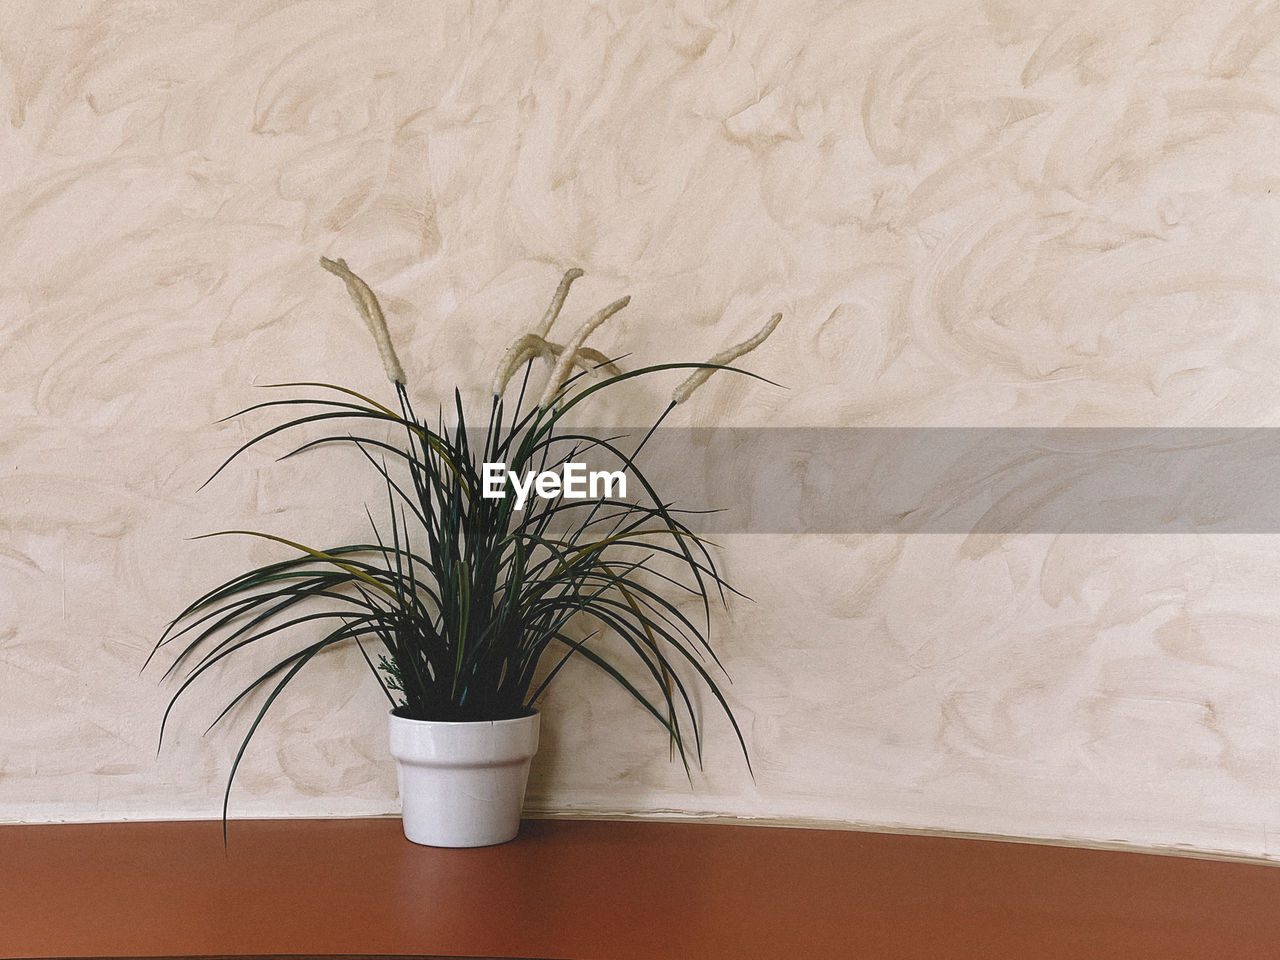 plant, wood, indoors, wall, no people, wall - building feature, houseplant, flowerpot, nature, potted plant, flooring, floor, art, home interior, drawing, table, growth, vase, white, interior design